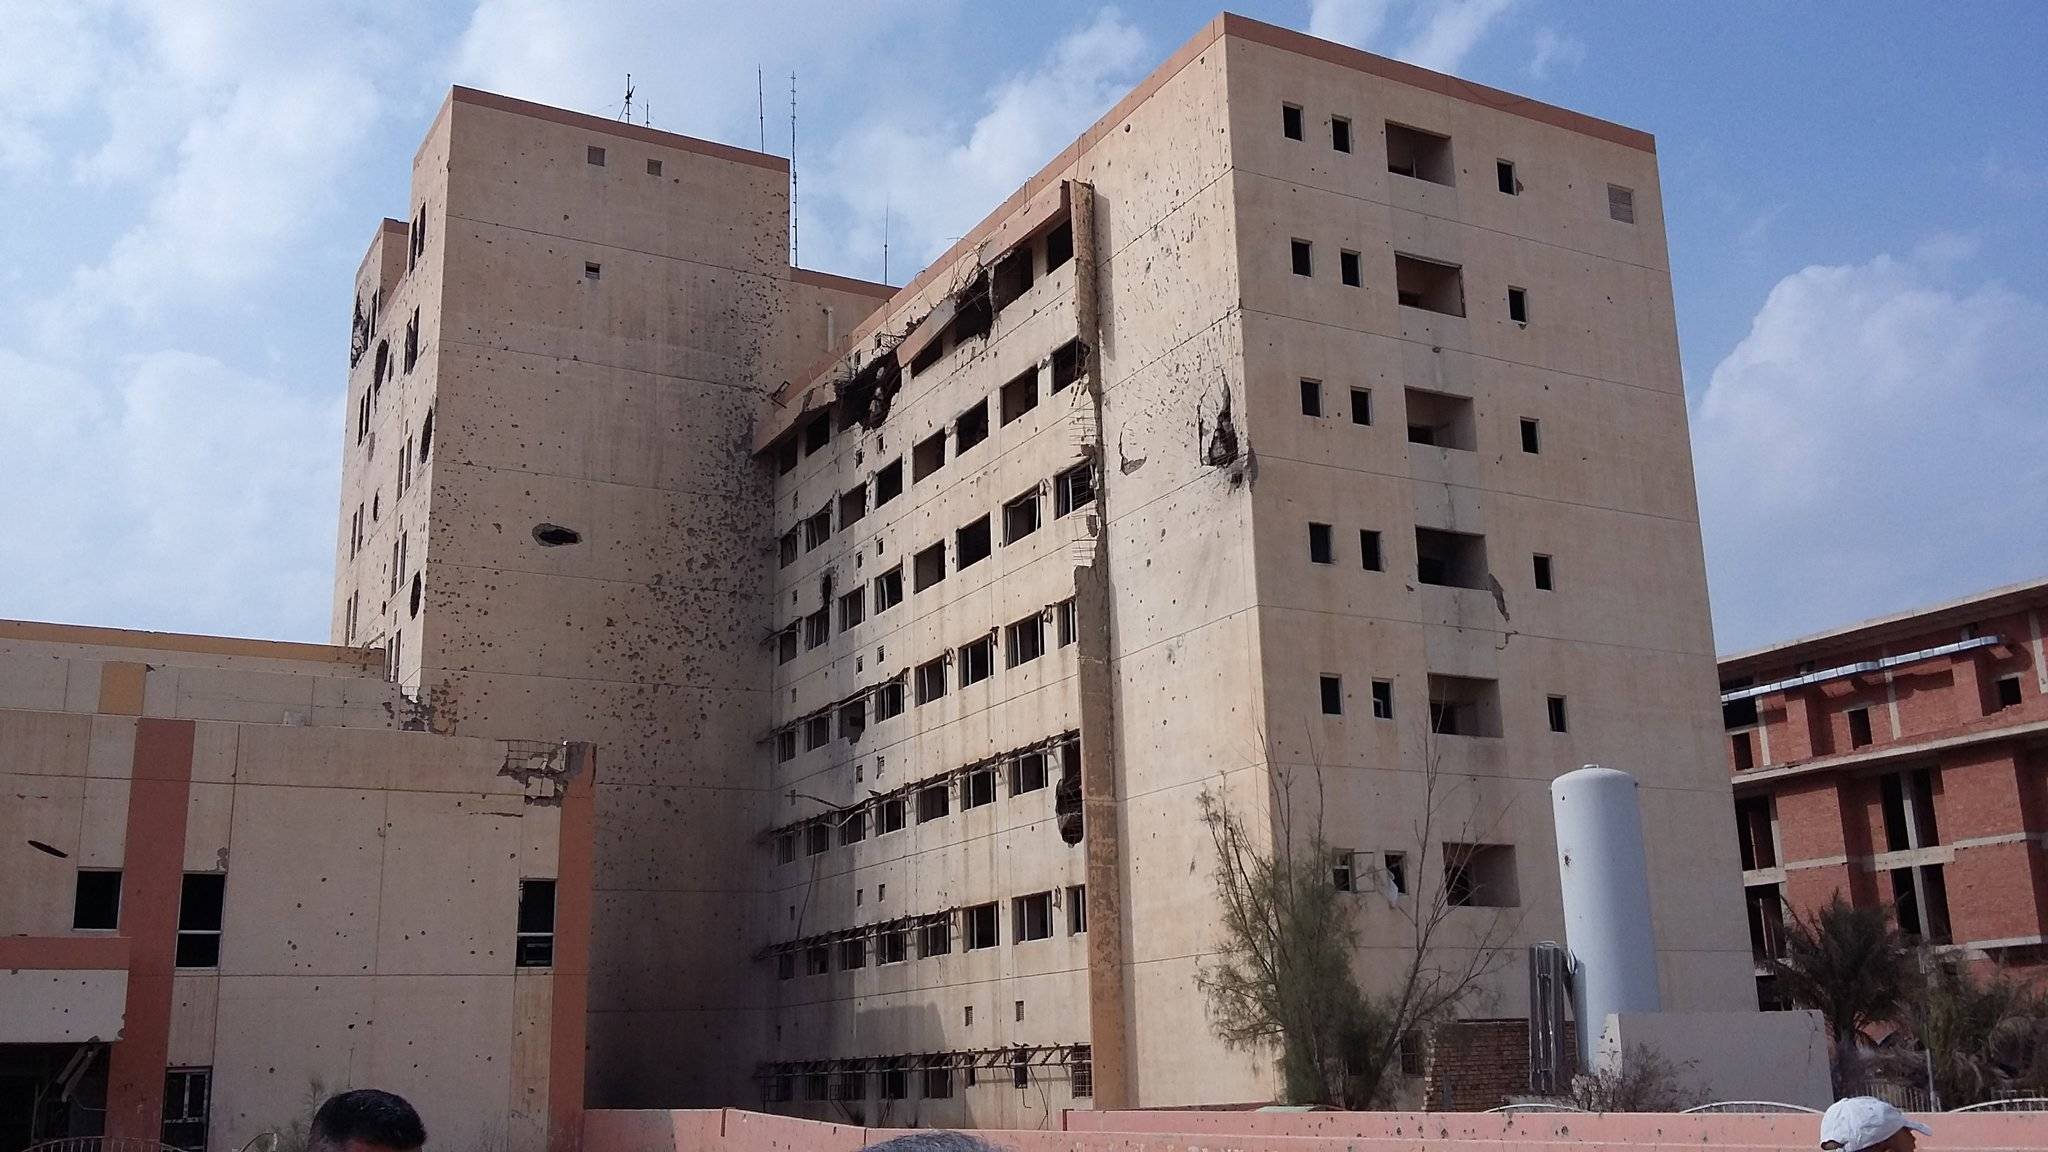 Tikrit Hospital in Iraq where Sarah Abdullah worked after it was hit by a suicide bomber in 2013. Abdullah fled Iraq with her husband in 2013, only a year before ISIS captured the city. Contributed by Sarah Abdullah.